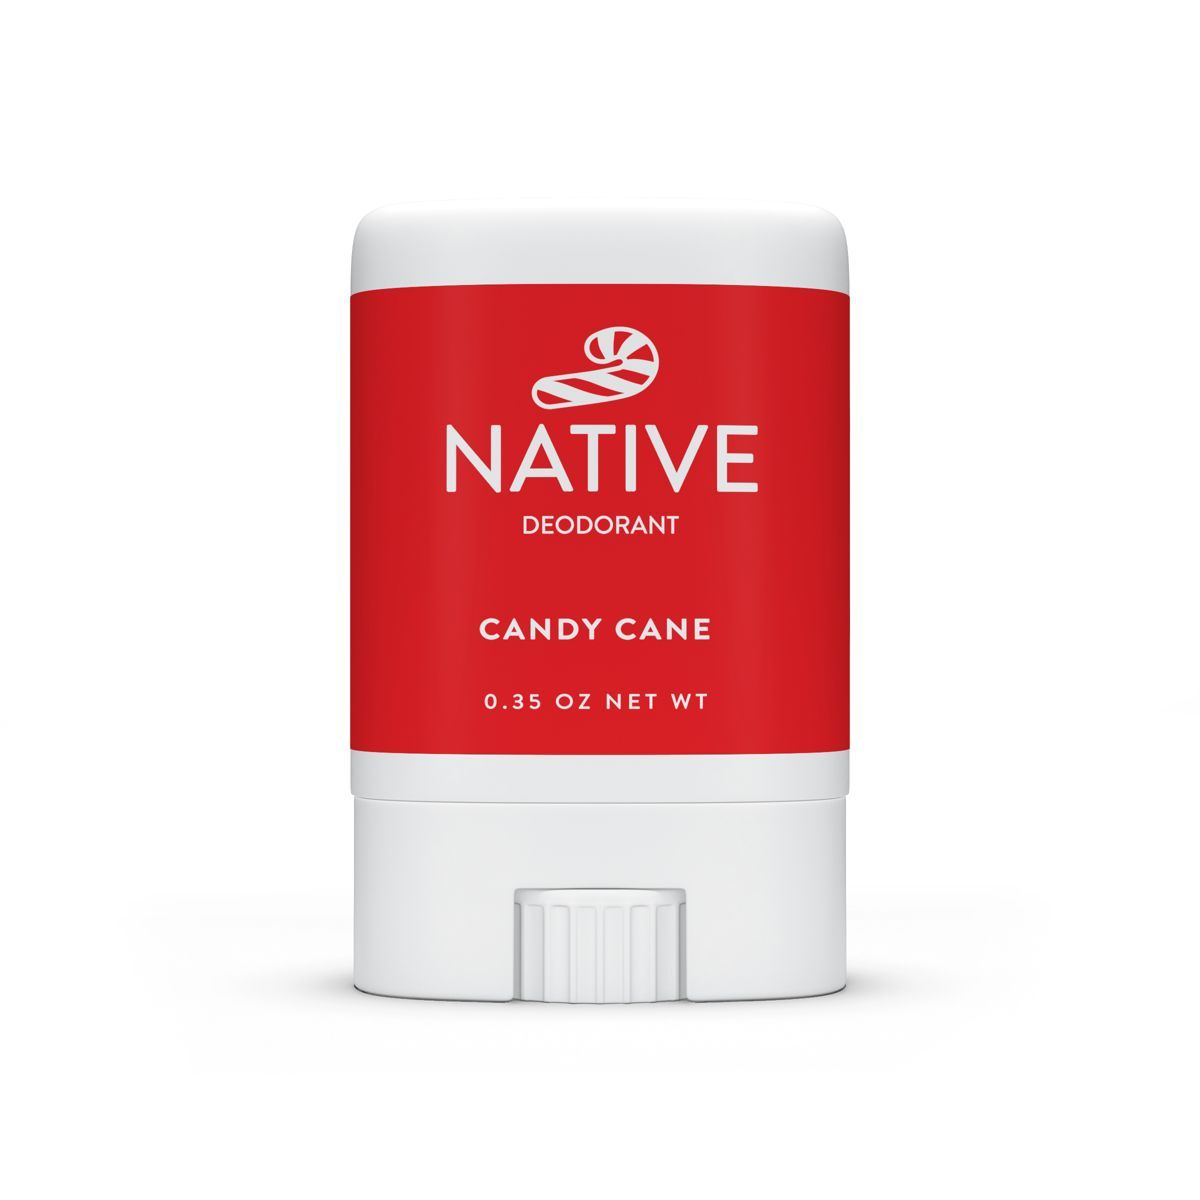 Native Deodorant - Limited Edition Holiday - Candy Cane - Aluminum Free - Trial Size 0.35 oz | Target